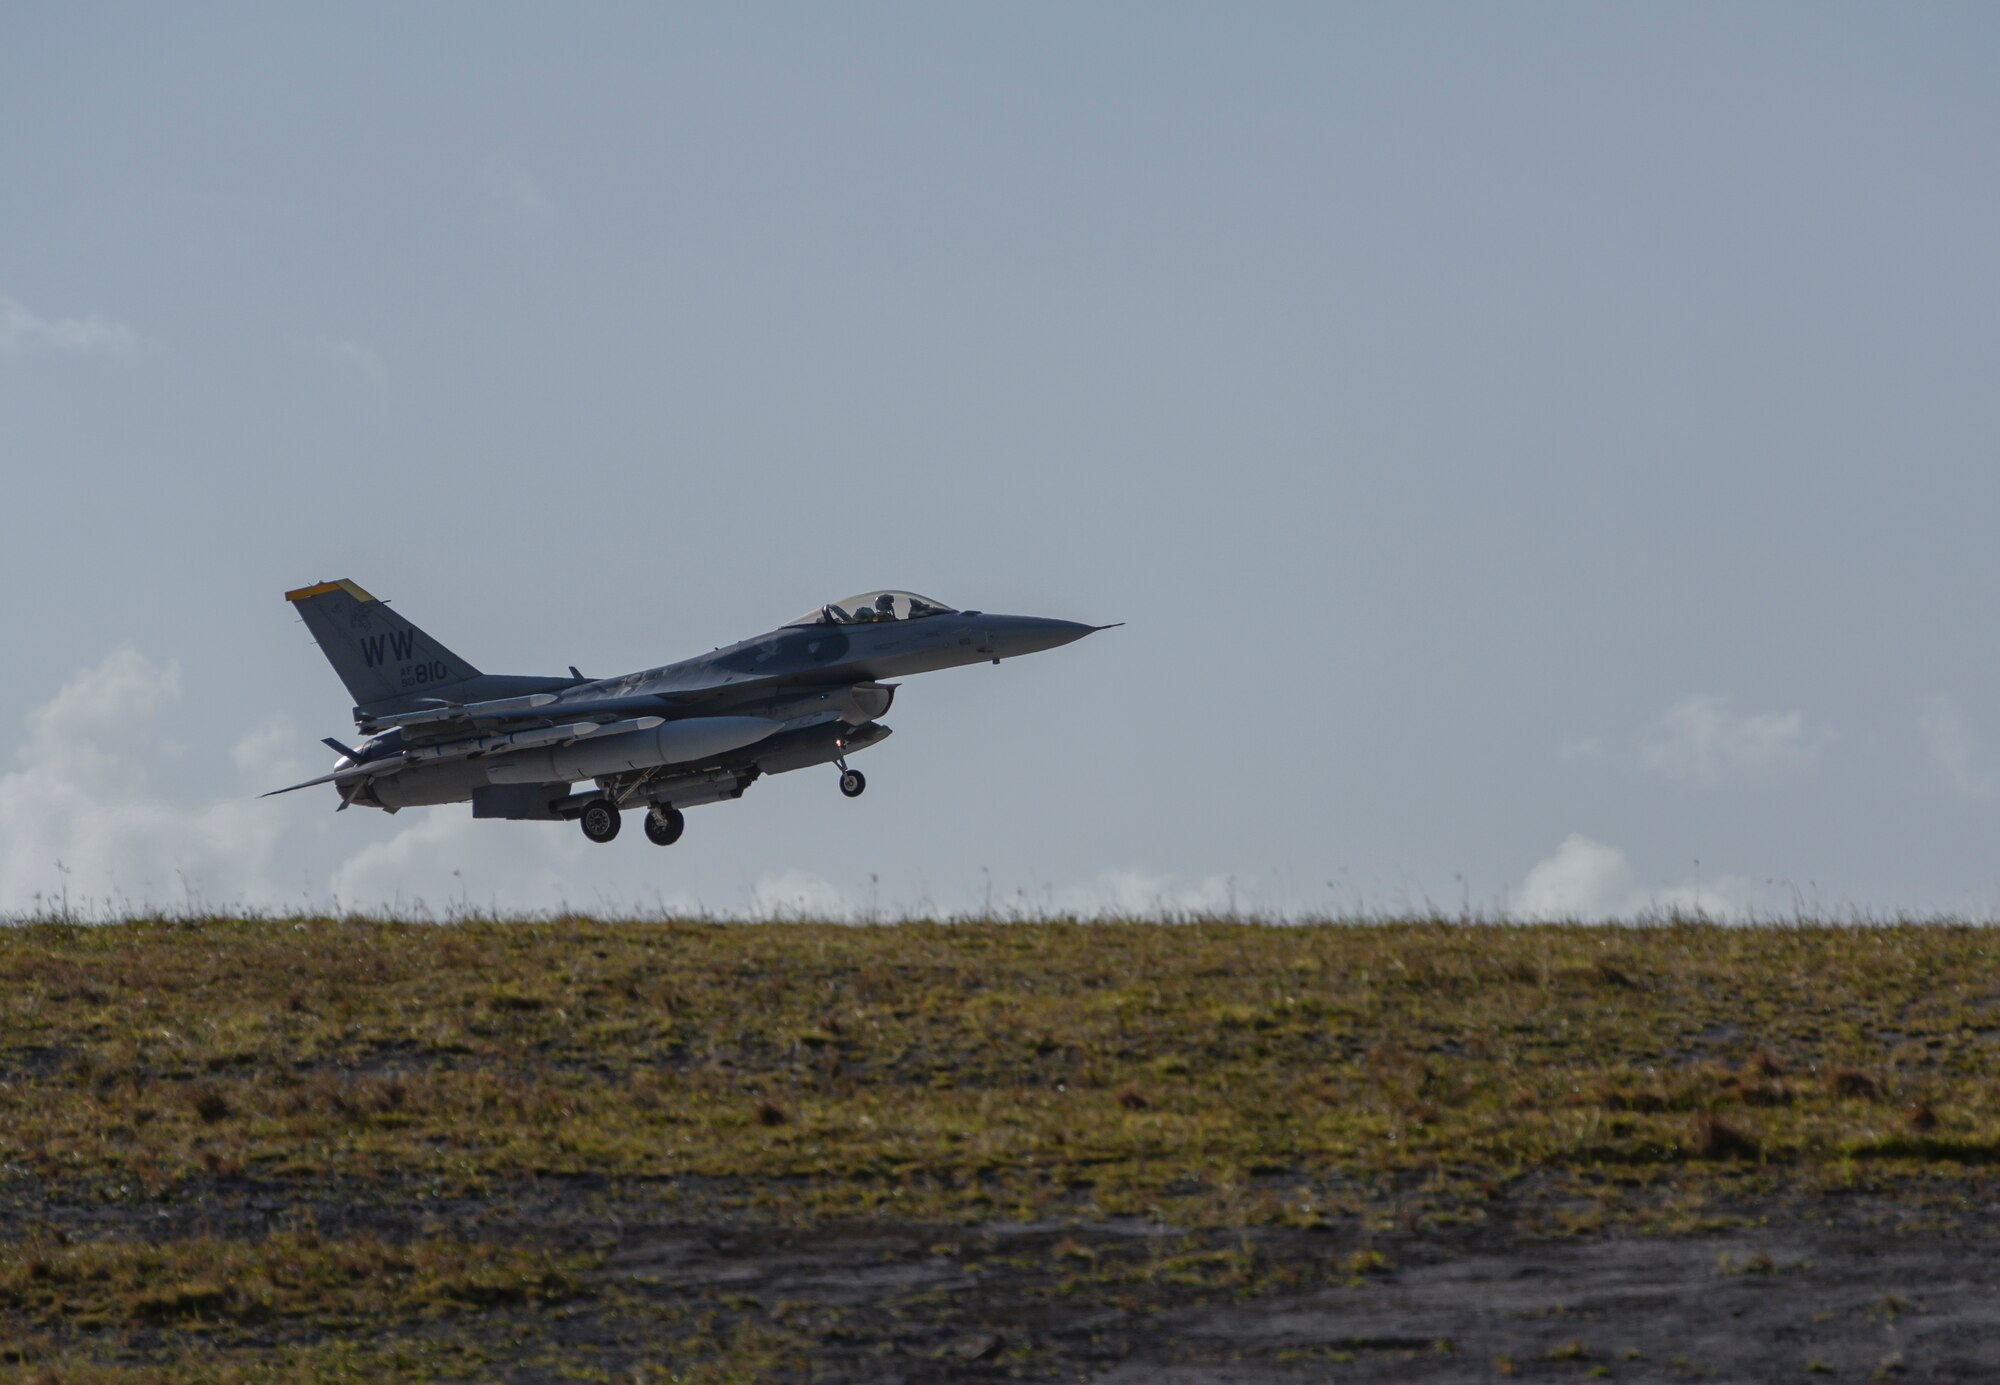 A U. S. Air Force F-16 Fighting Falcon assigned to the 35th Fighter Wing, Misawa Air Base, Japan lands at Andersen Air Force Base, Guam, April 22, 2019.